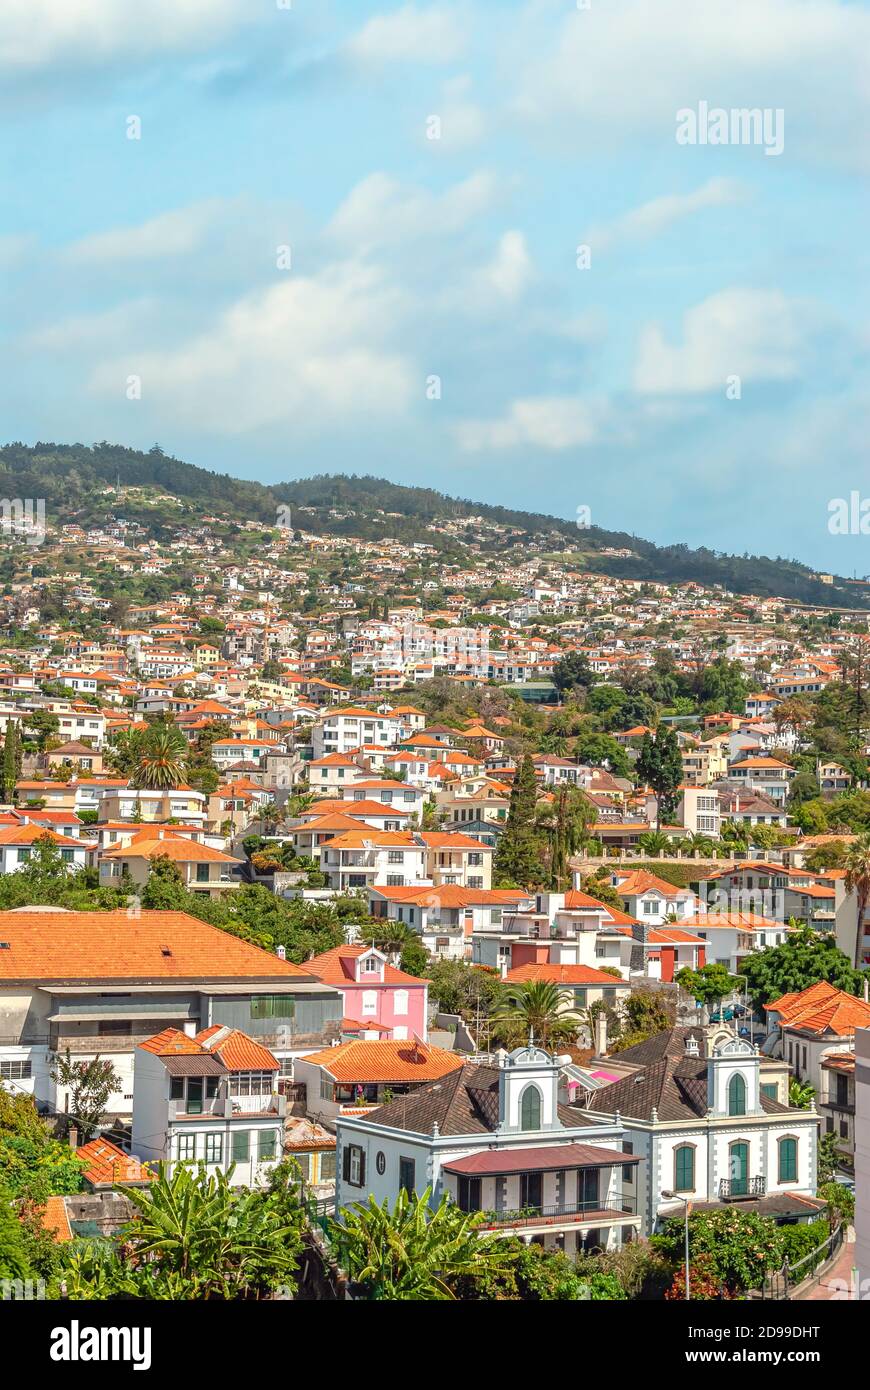 View over the city of Funchal seen from the mountain side, Madeira Island, Portugal. Stock Photo